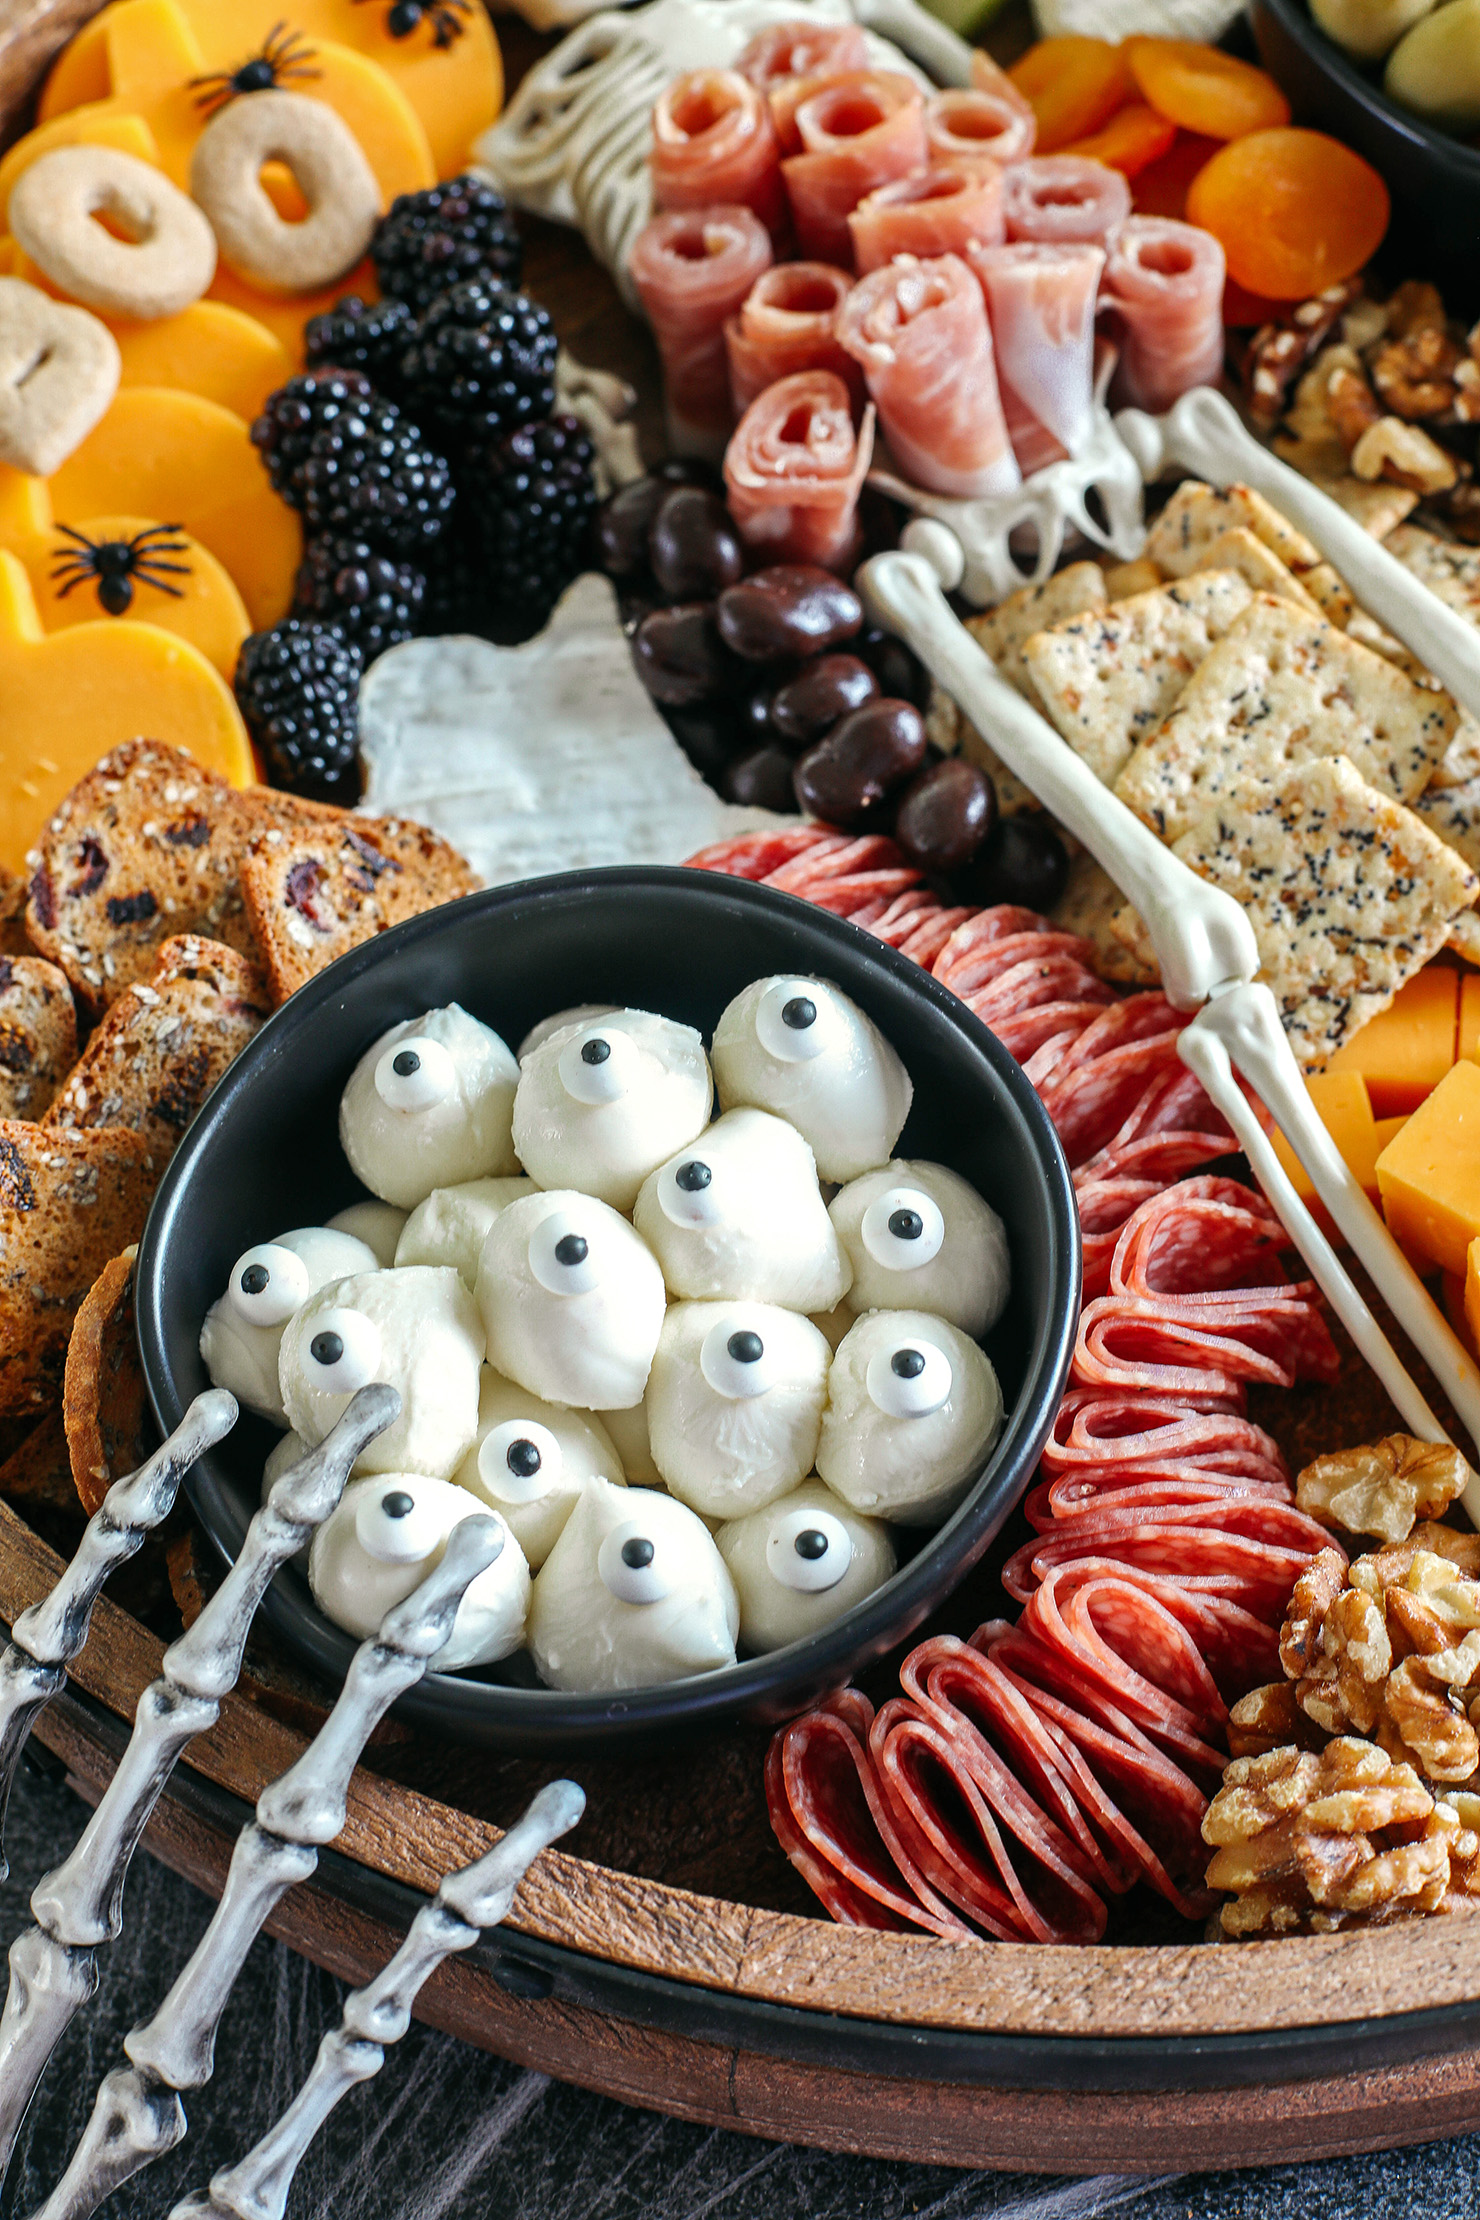 Build the spookiest Halloween Charcuterie Board perfect for your next party!  Filled with an assortment of your favorite cheeses, meats, crackers, fresh fruits, nuts and other fun ghoulish treats!